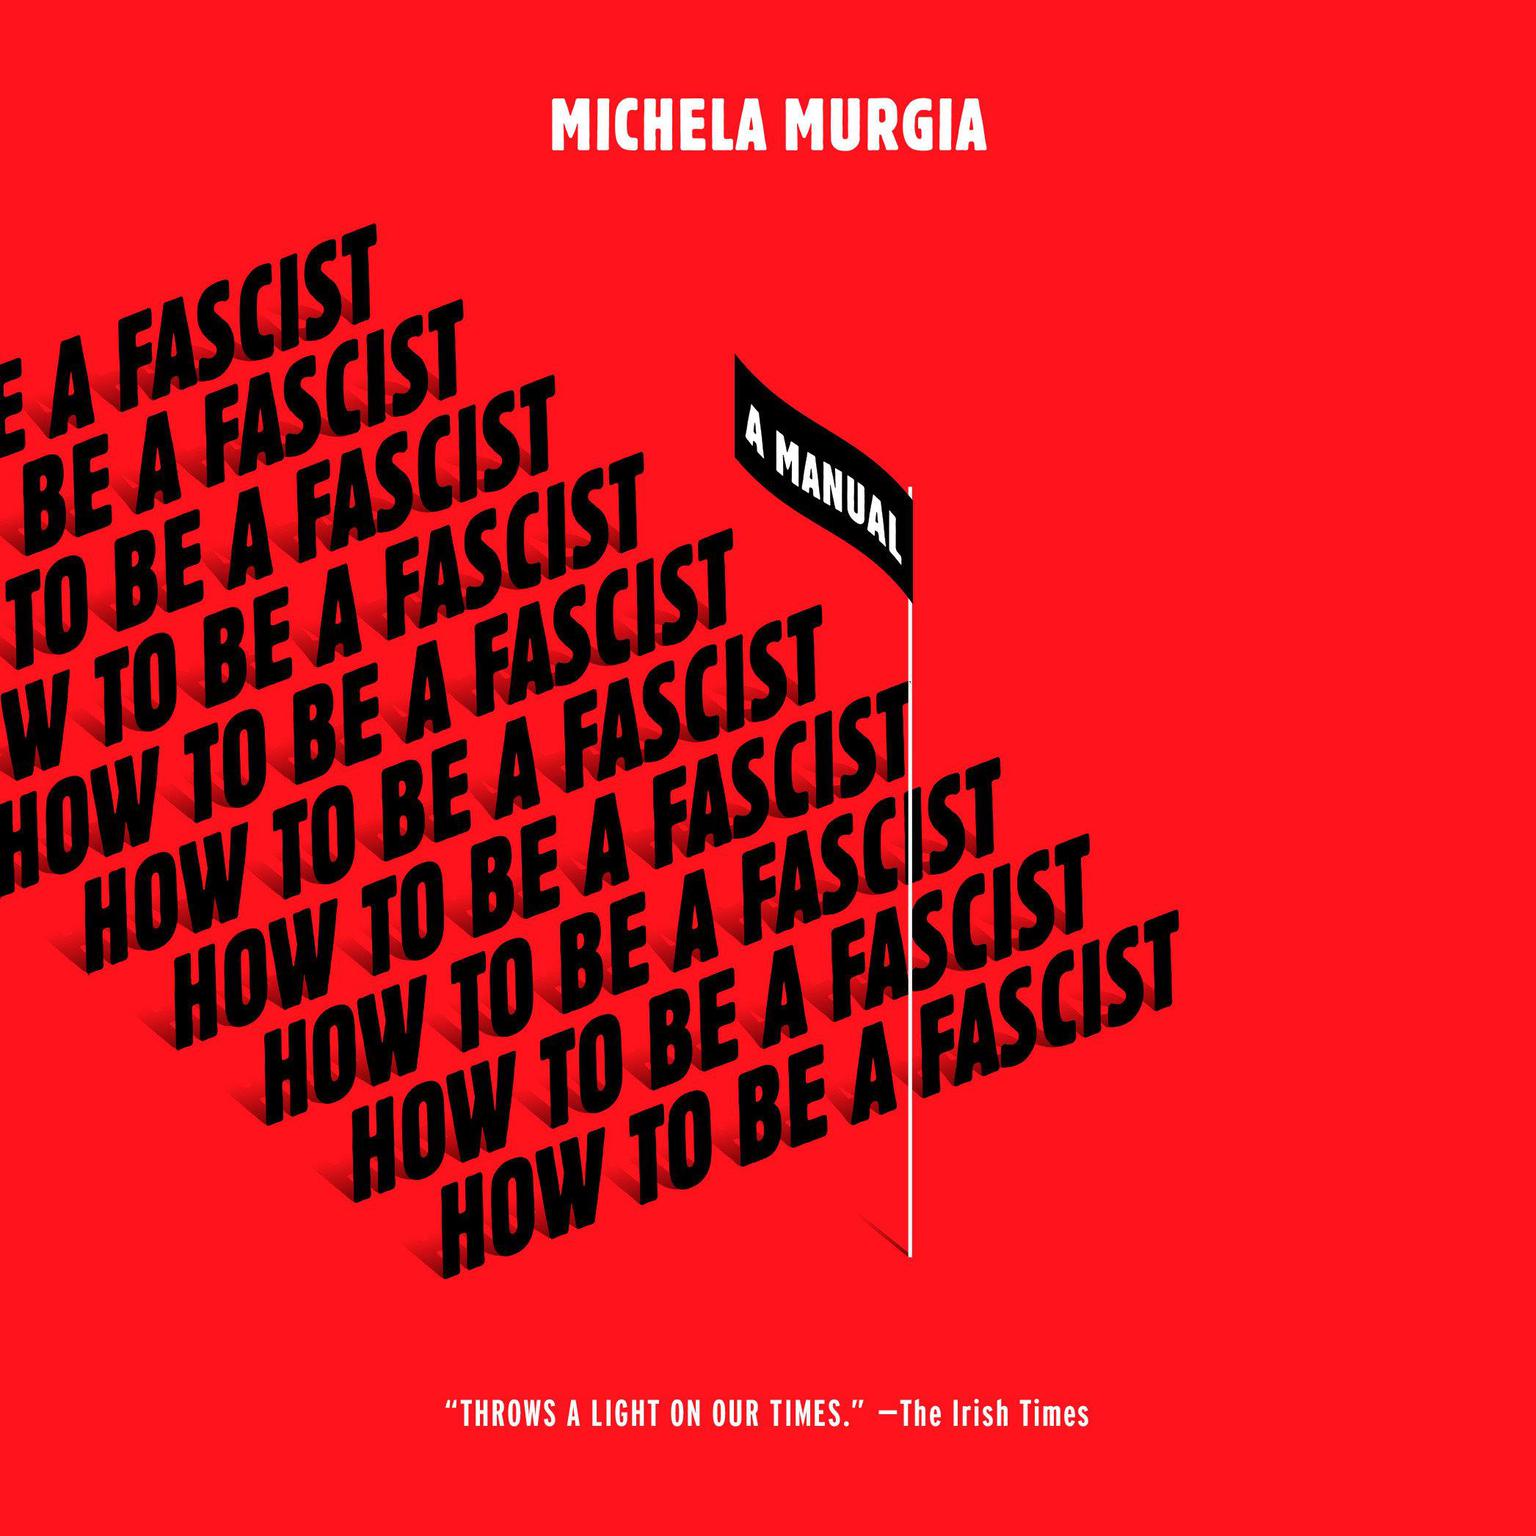 How to Be a Fascist: A Manual Audiobook, by Michela Murgia